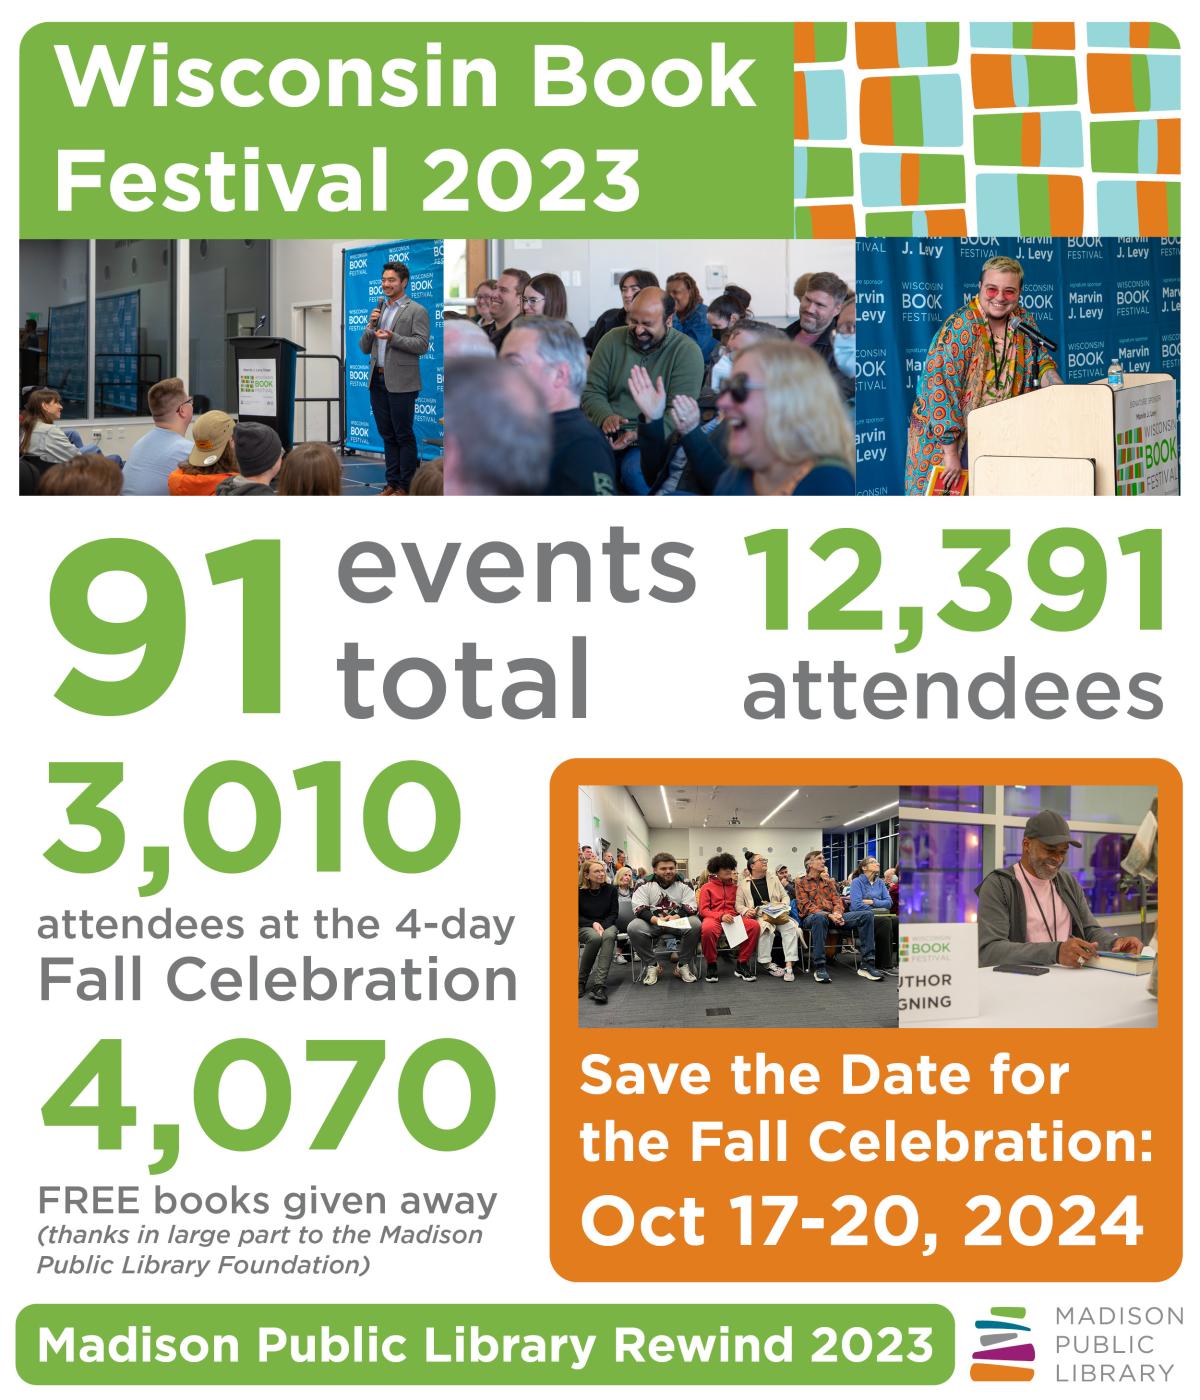 Madison Public Library Year in Review 2023 Wisconsin Book Festival